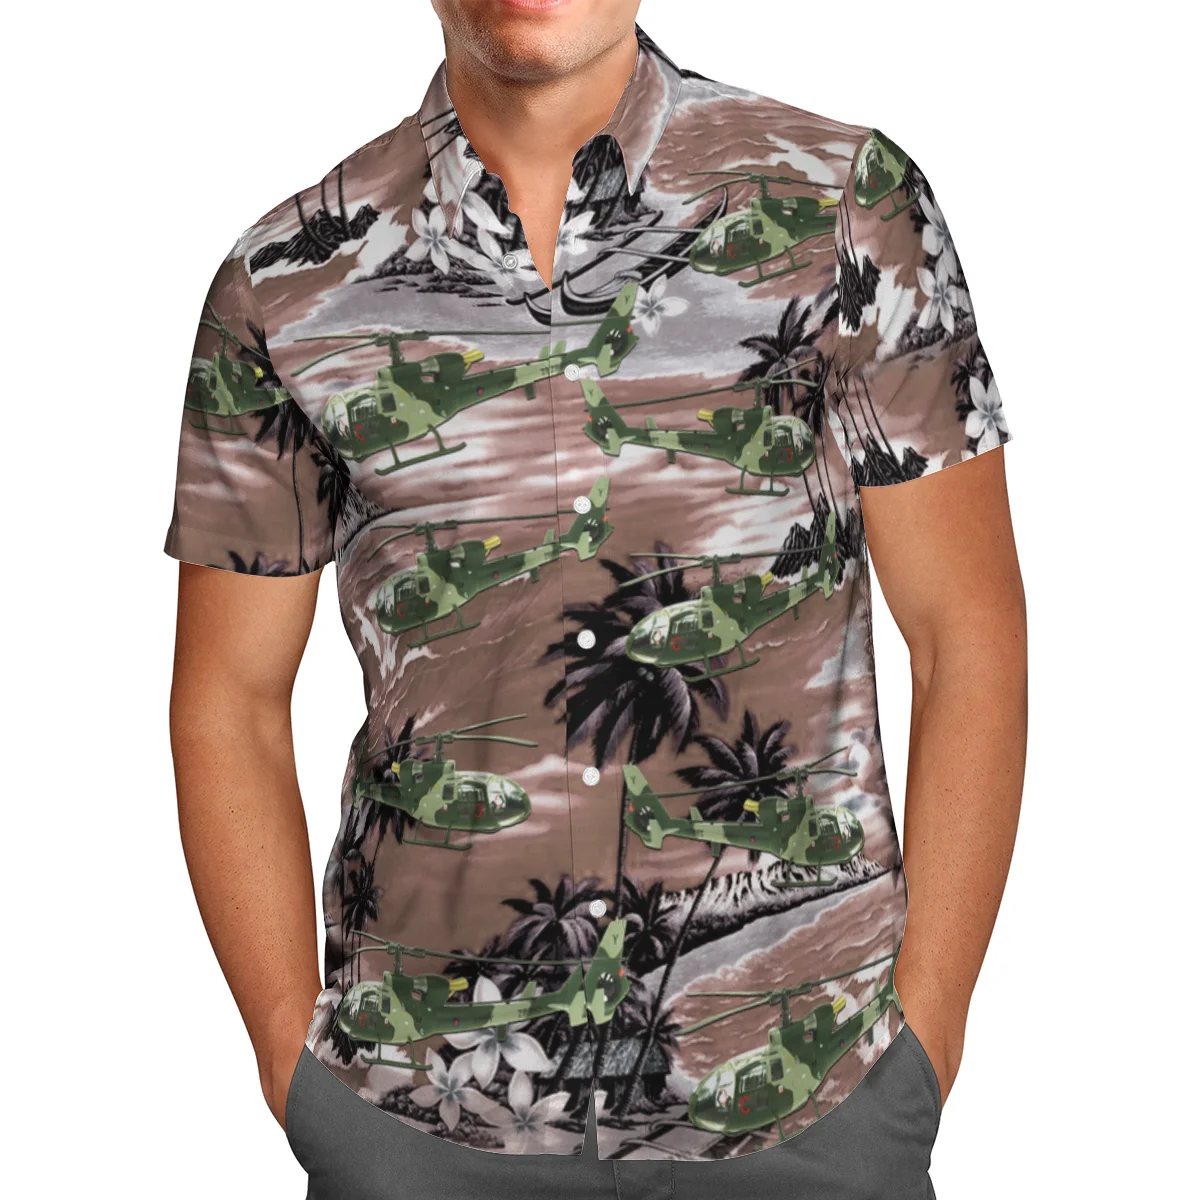 

Helicopter Print Short Sleeve Shirt For Men Loose Cardigan Button Shirts Plus Size Hawaiian Style Summer 2021 Ventilated Shirt-2